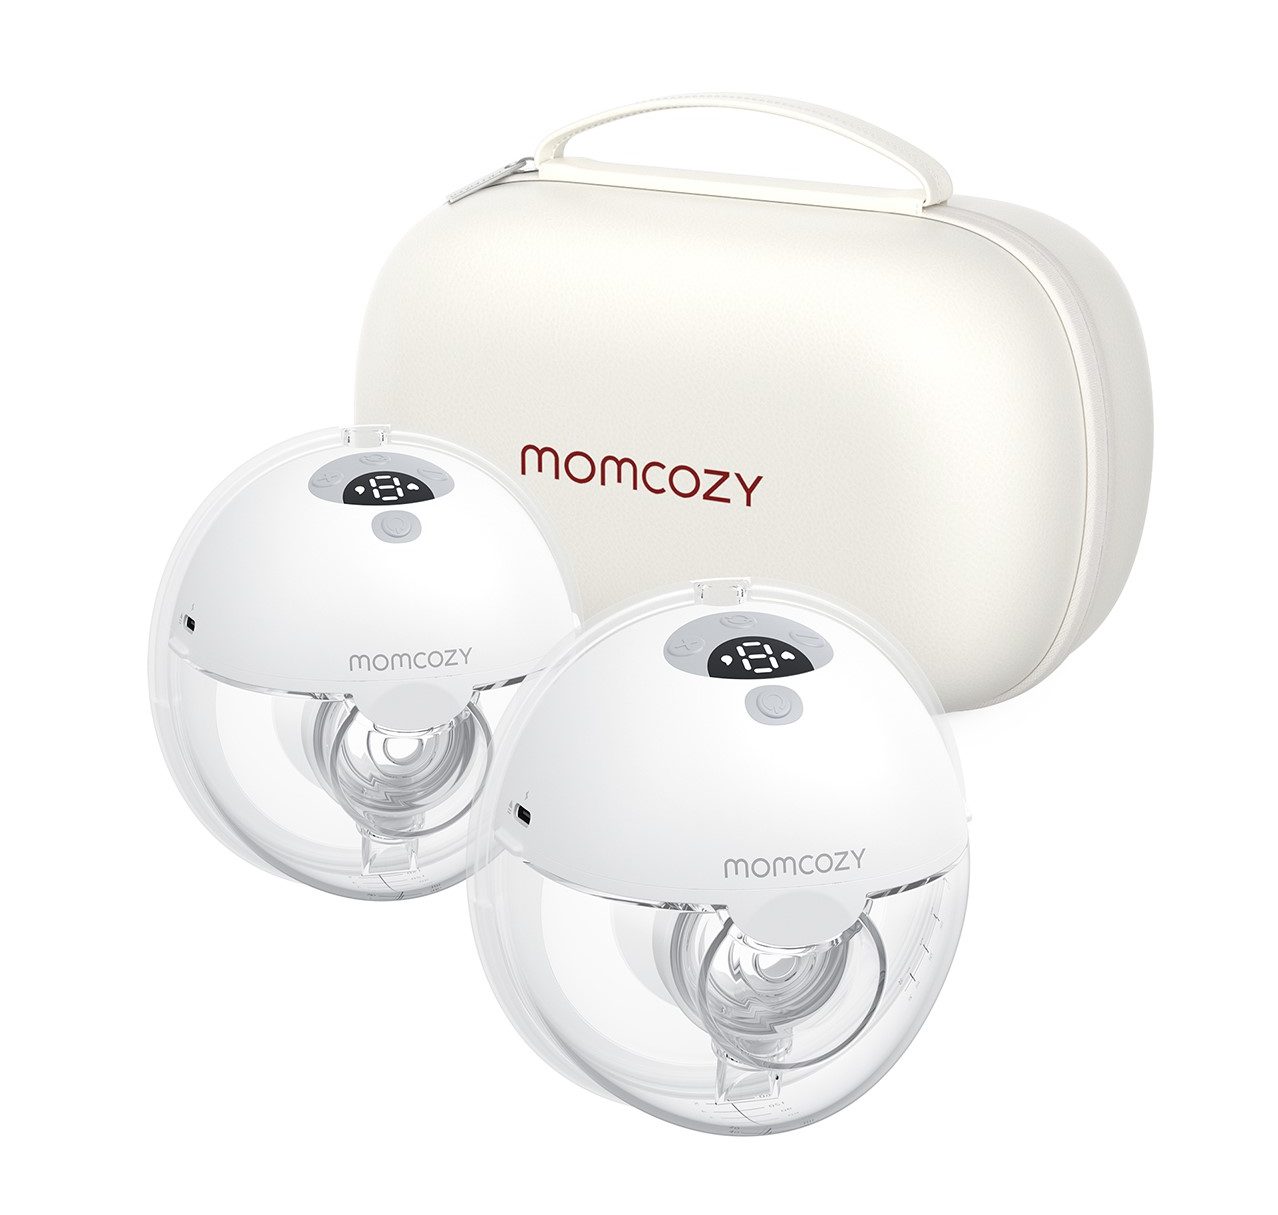 Discover the Ease of Breastfeeding with the Momcozy Milk Collector